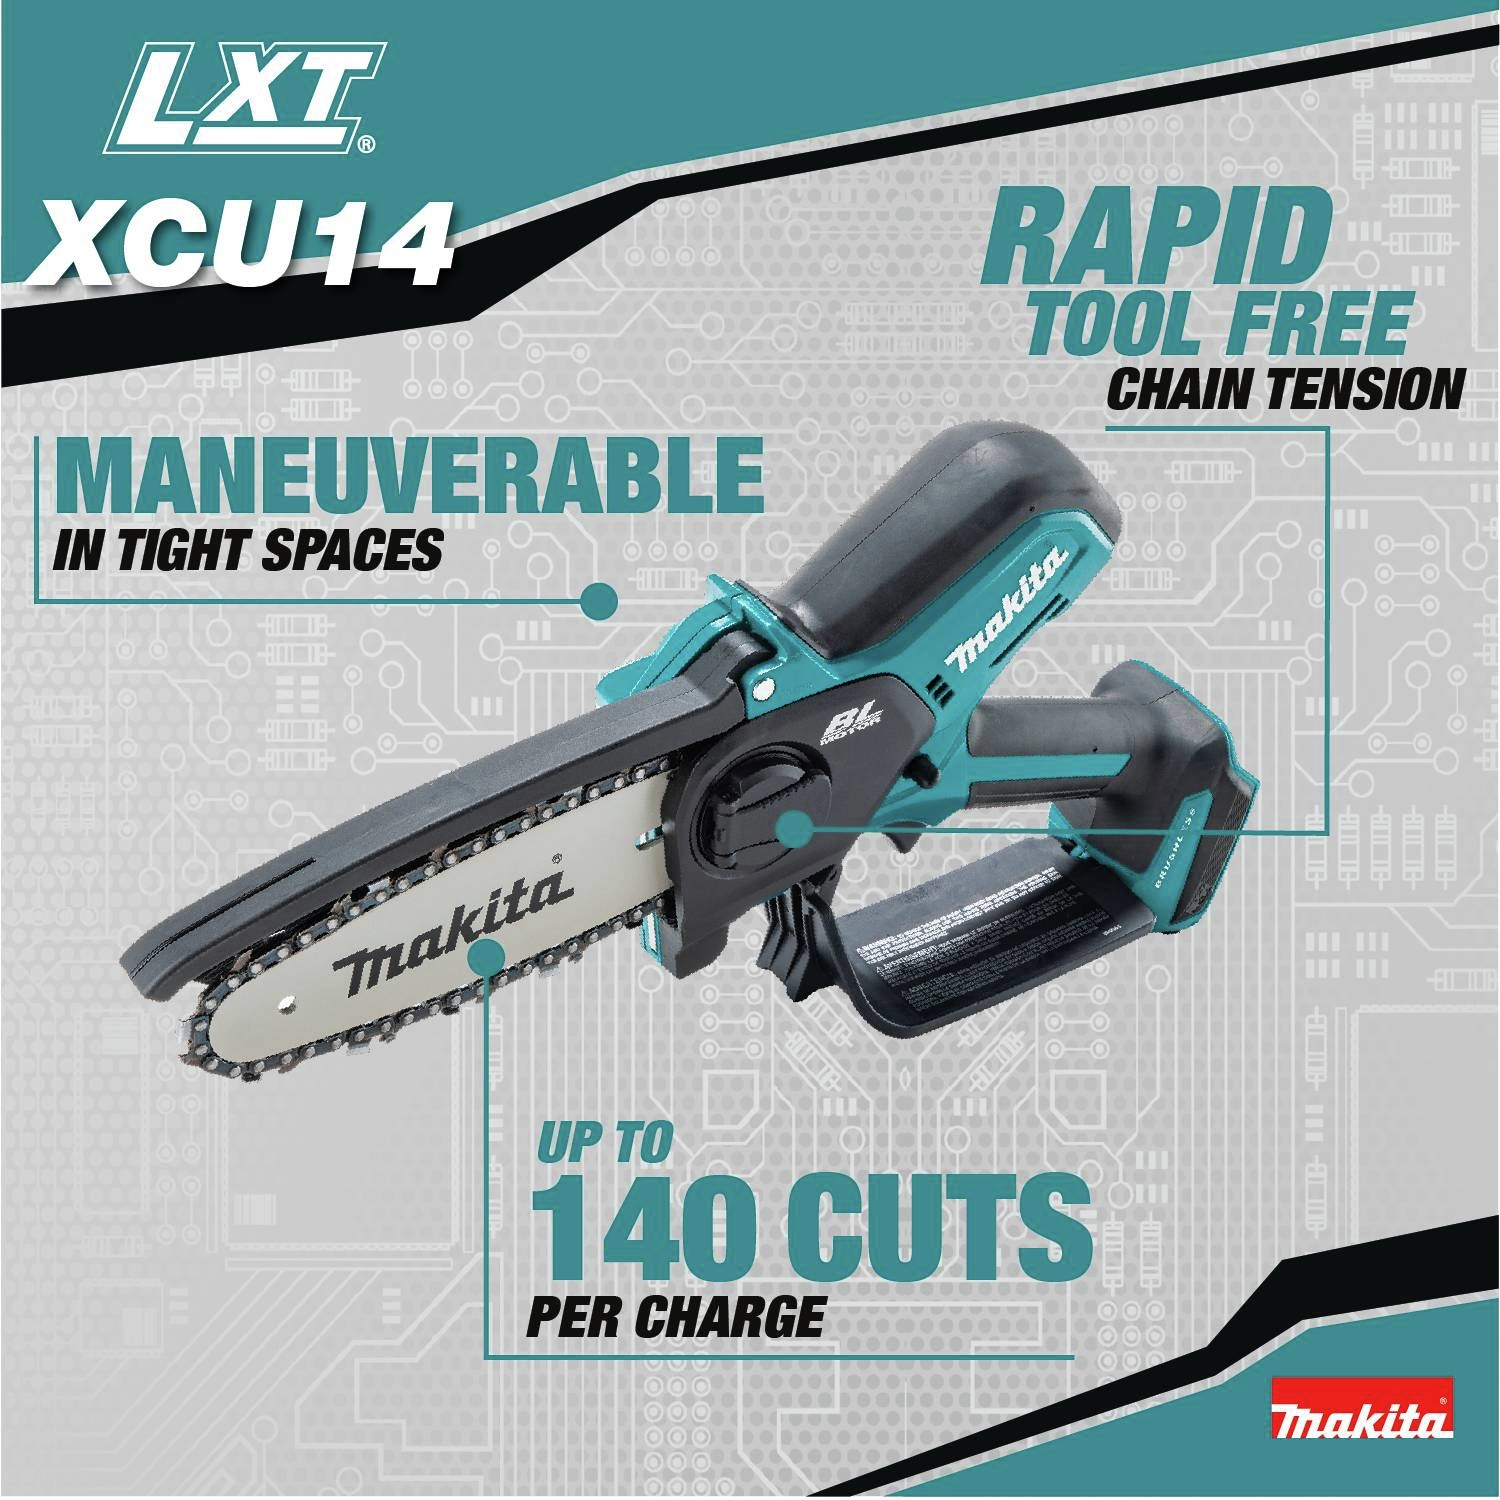 Maneuverable in tight spaces. Rapid tool free chain tension. Up to 140 cuts per charge.